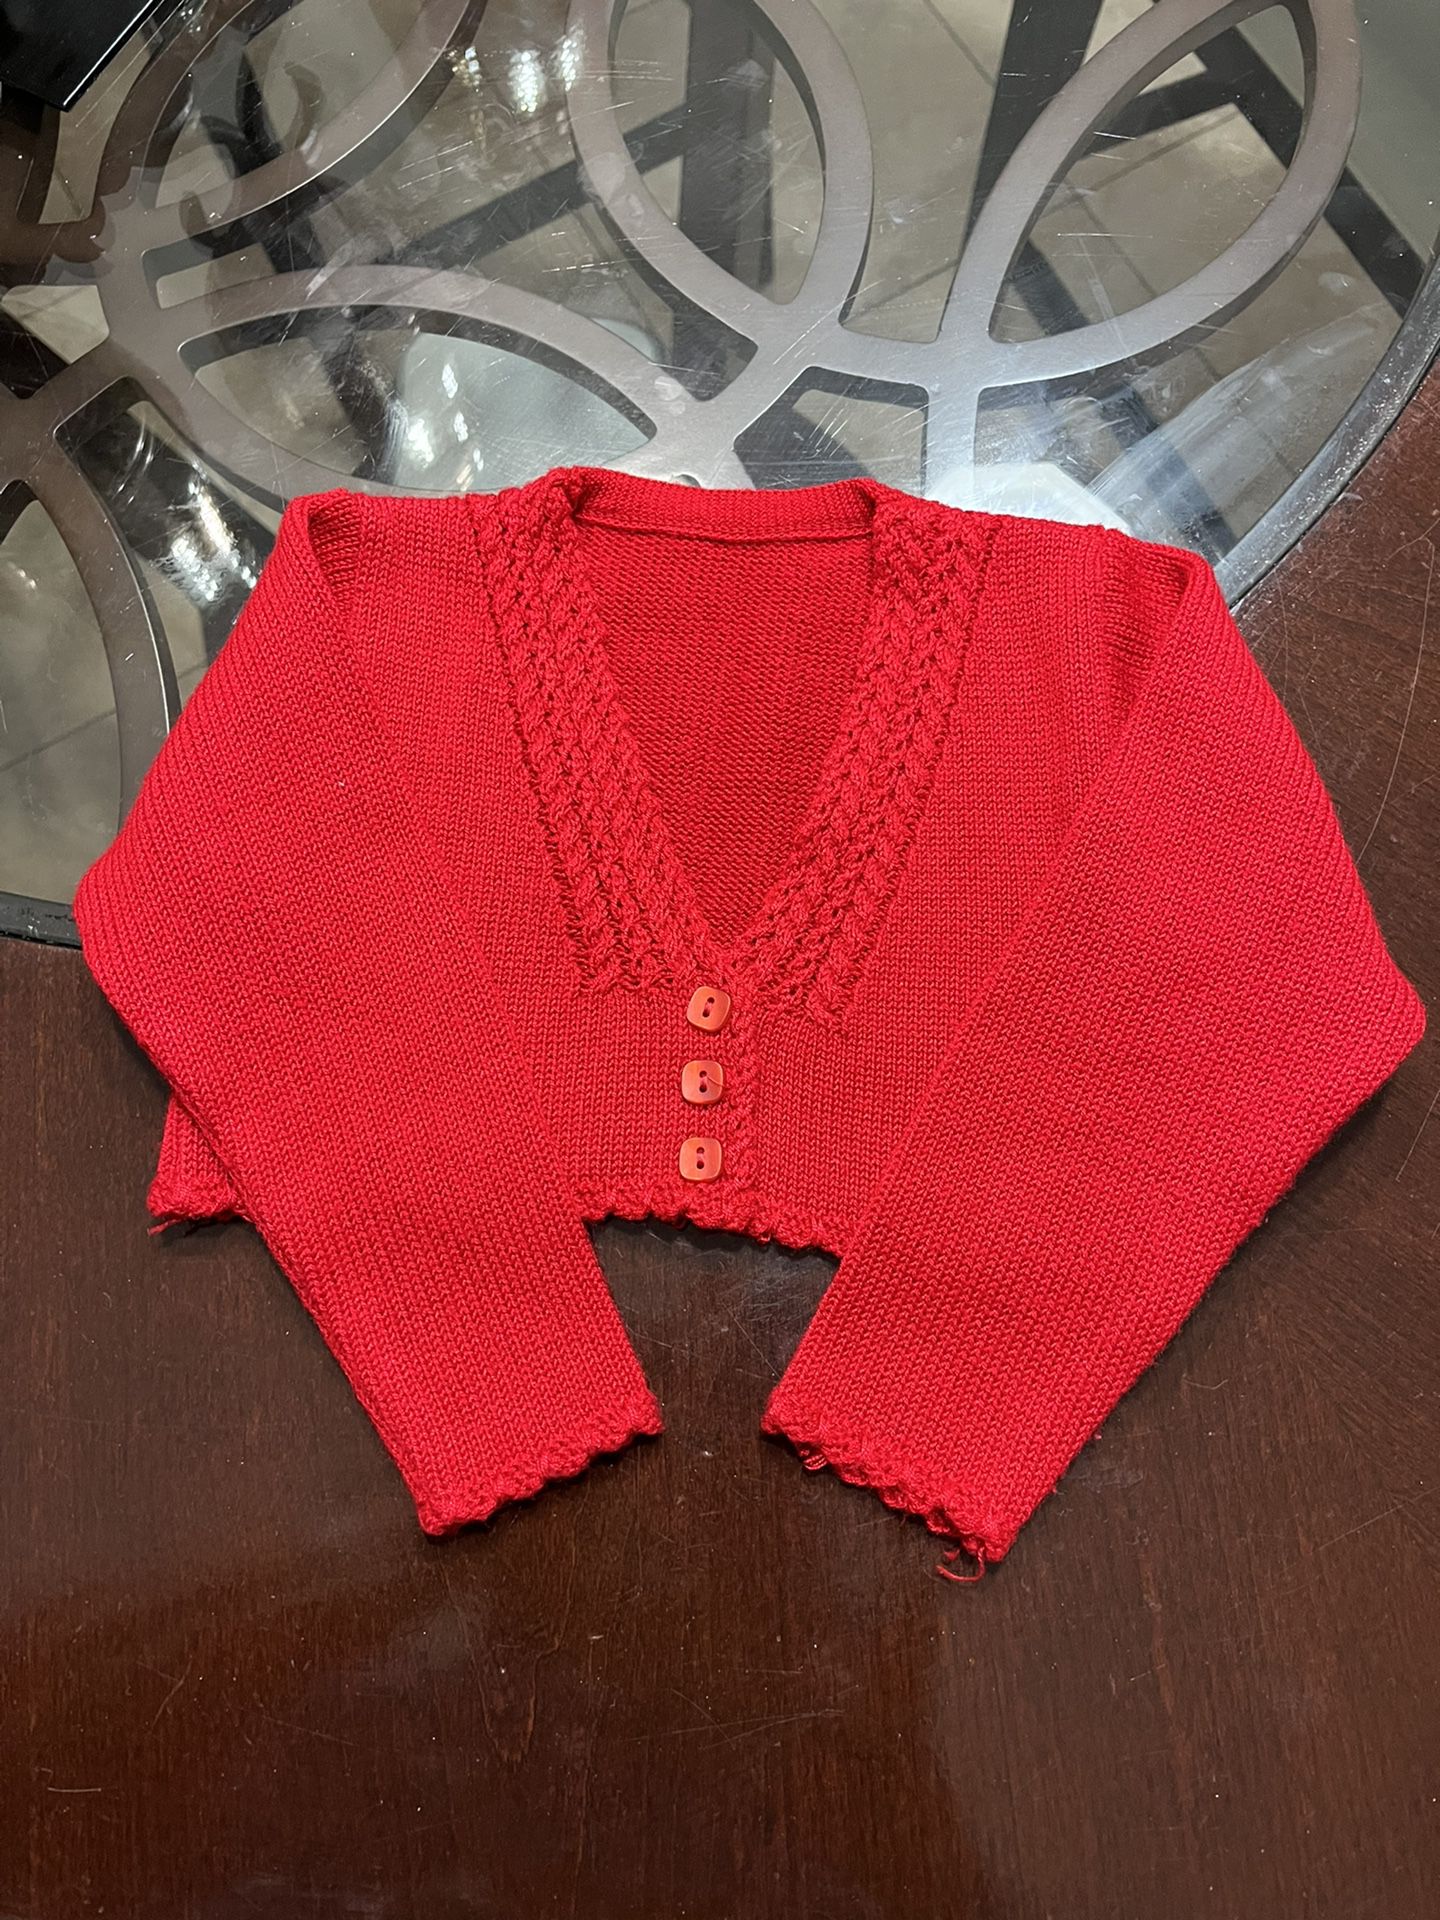 shrug knitted red, light sweater, size 24 months 